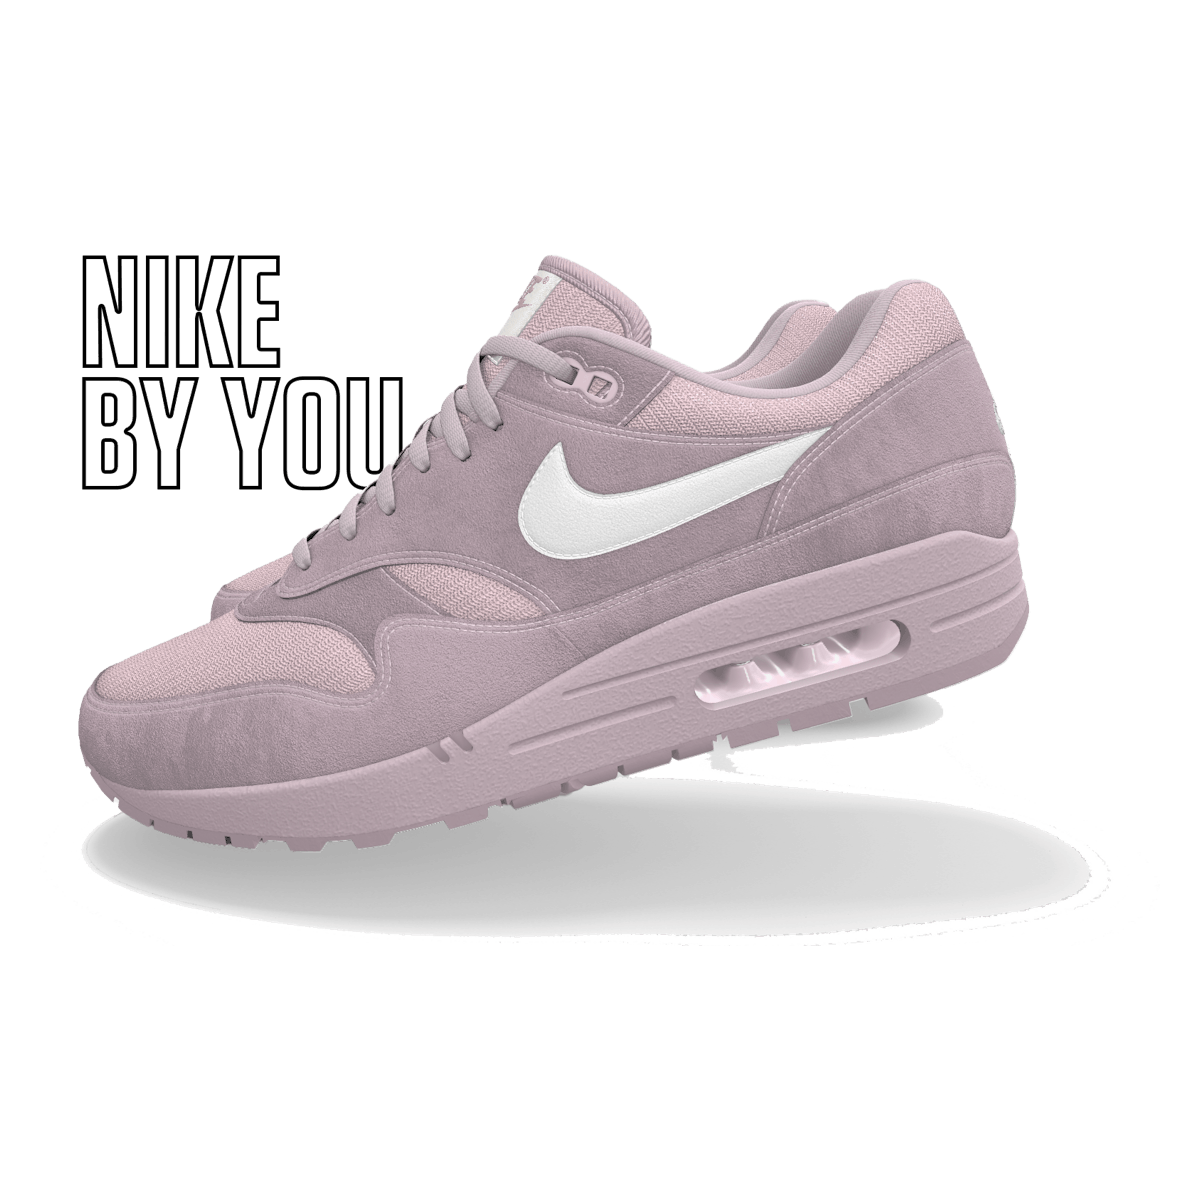 Nike Air Max 1 '87 "By You" 2024